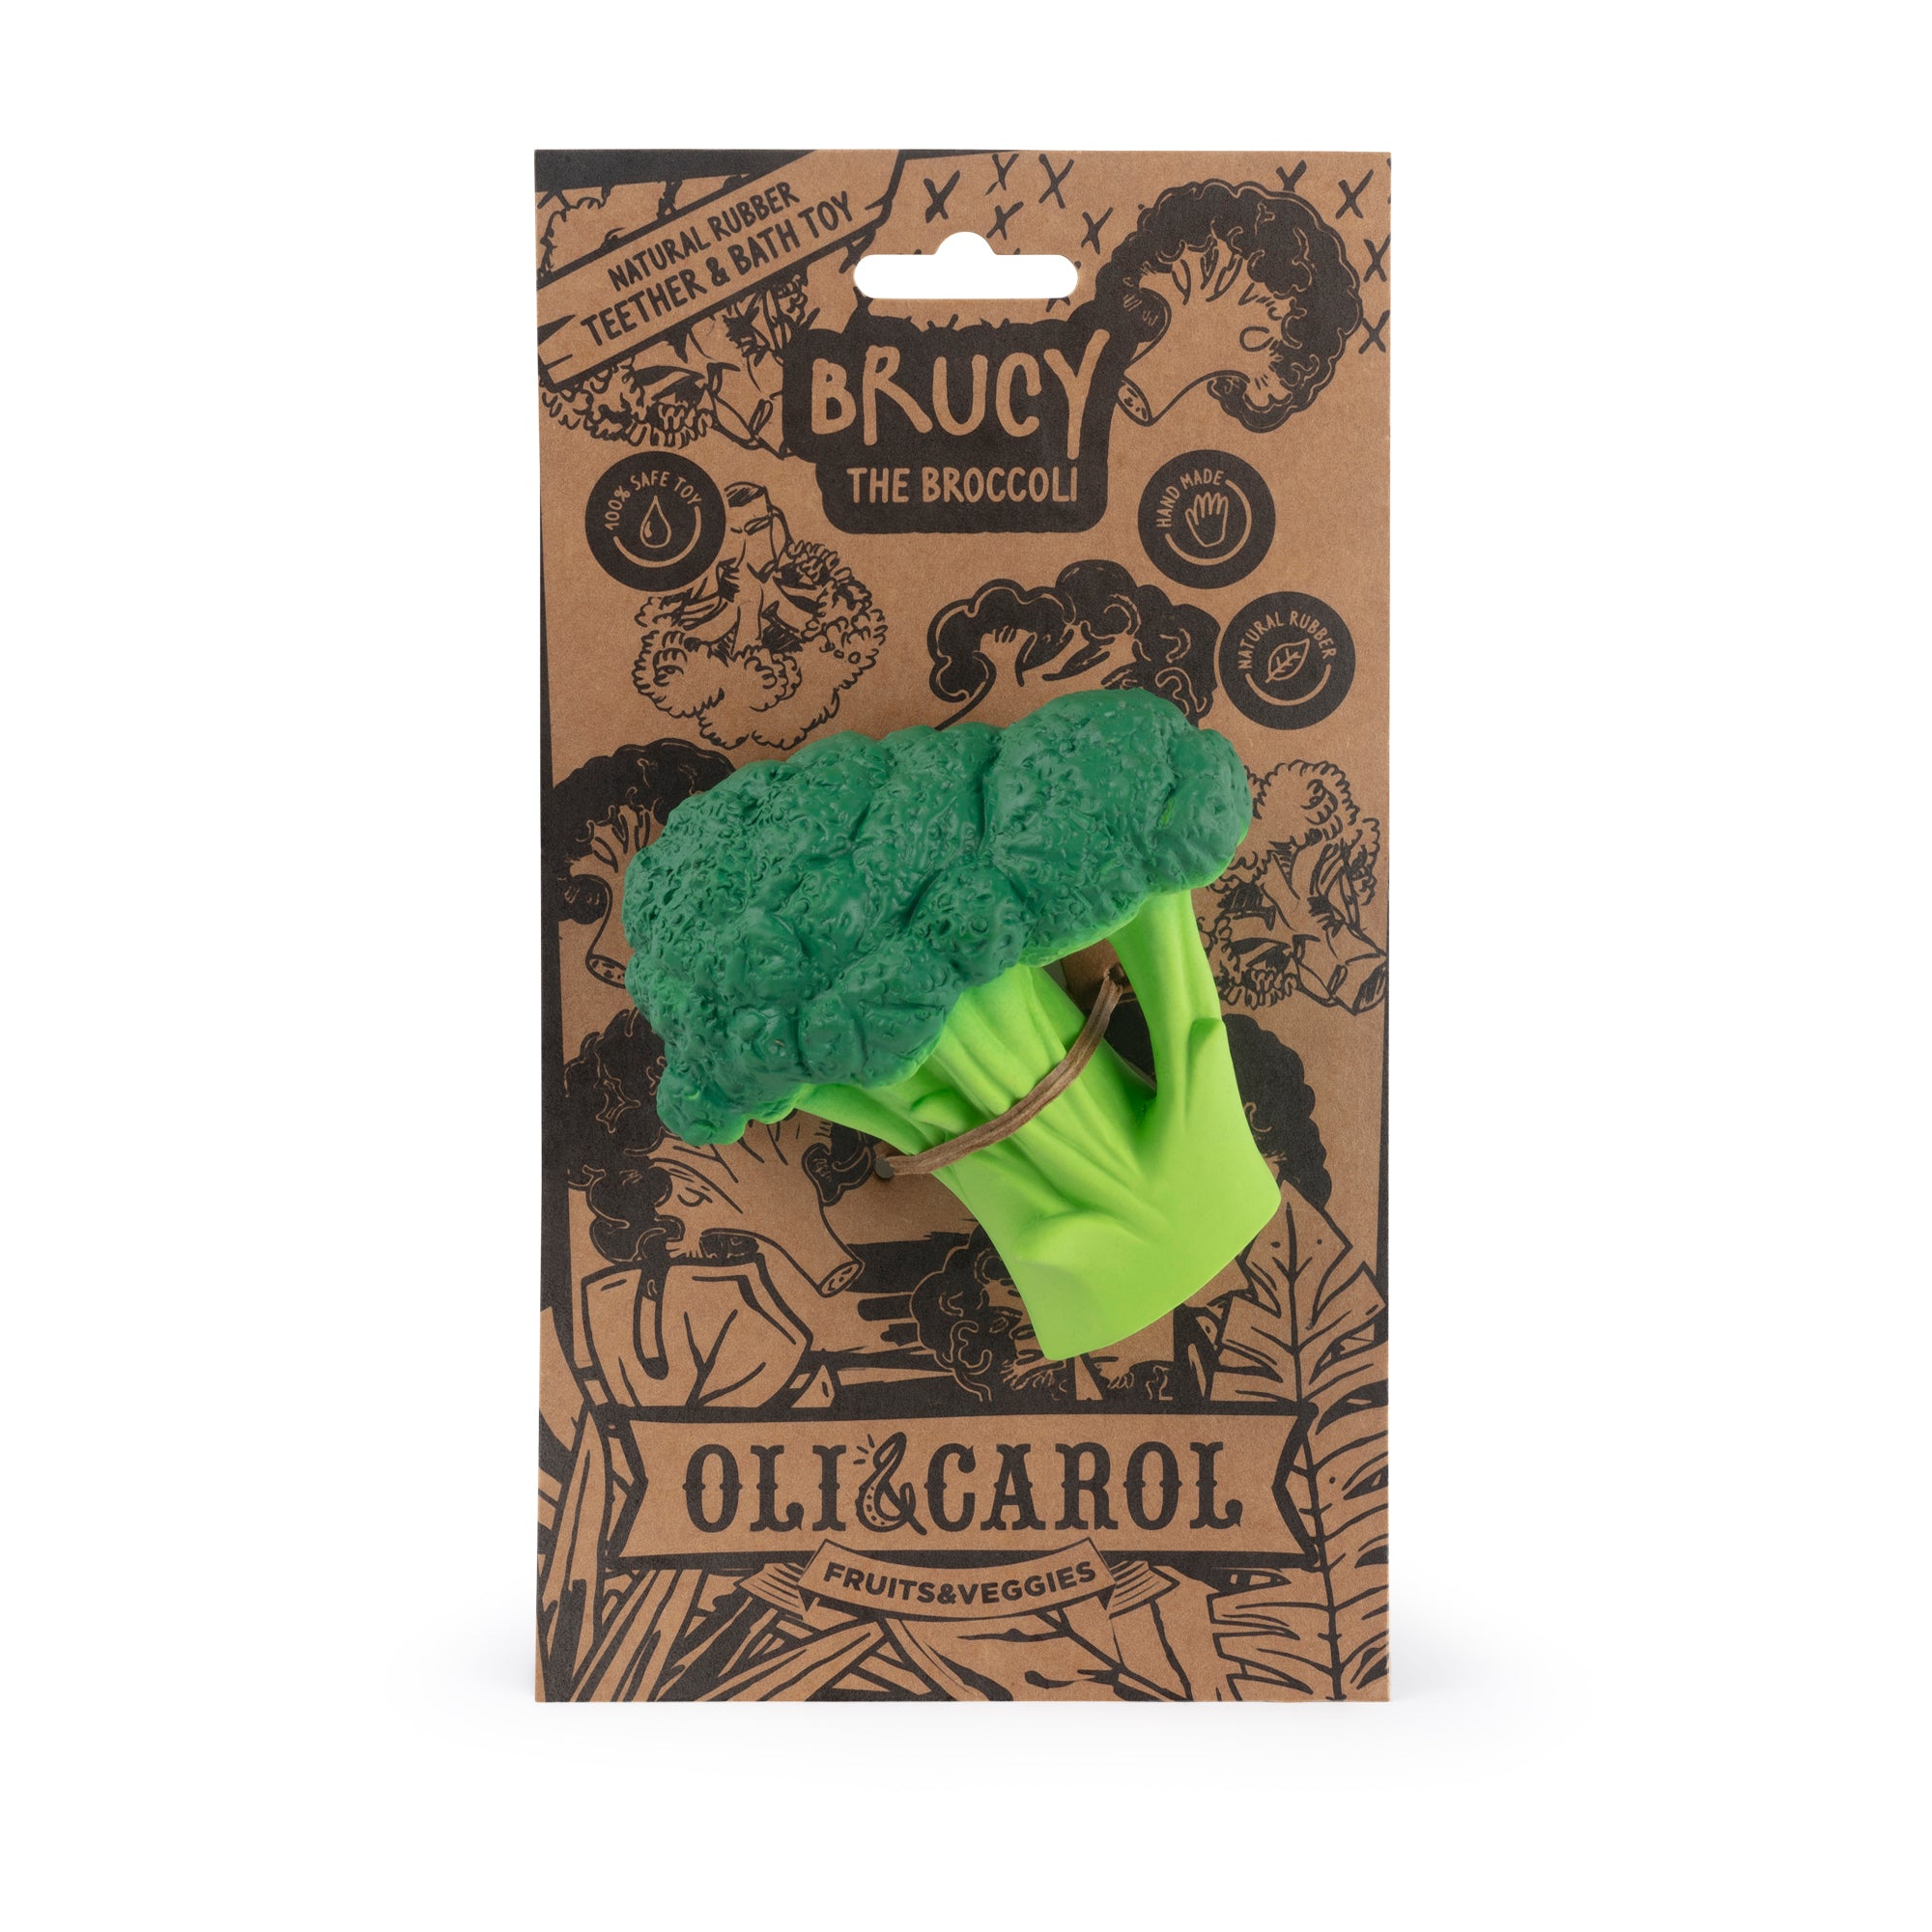 Broccoli shaped baby teether by Oli & Carol against branded backing card and white background.